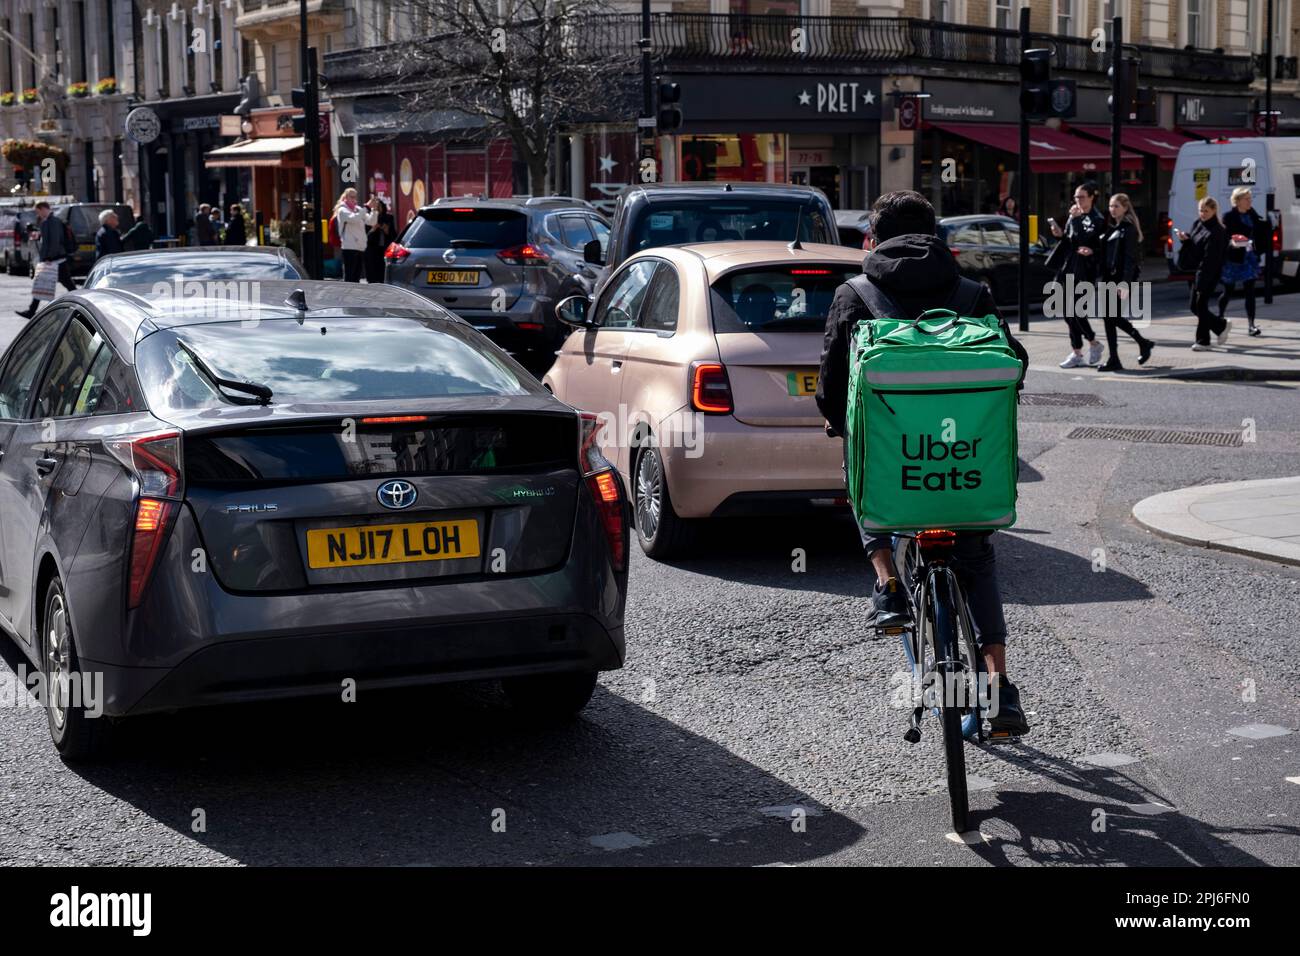 Uber Eats takeaway delivery cycle courier negotiating traffic on 27th March 2023 in London, United Kingdom. Uber Eats is an online food ordering and delivery platform launched by Uber in 2014. It acts as an intermediary between independent takeaway food outlets and customers, with thousands of cycle couriers delivering food by bicycle and other forms of transport. Gig workers are independent contractors, online platform workers, contract firm workers, on-call workers and temporary workers. Gig workers enter into formal agreements with on-demand companies to provide services to the companys cli Stock Photo